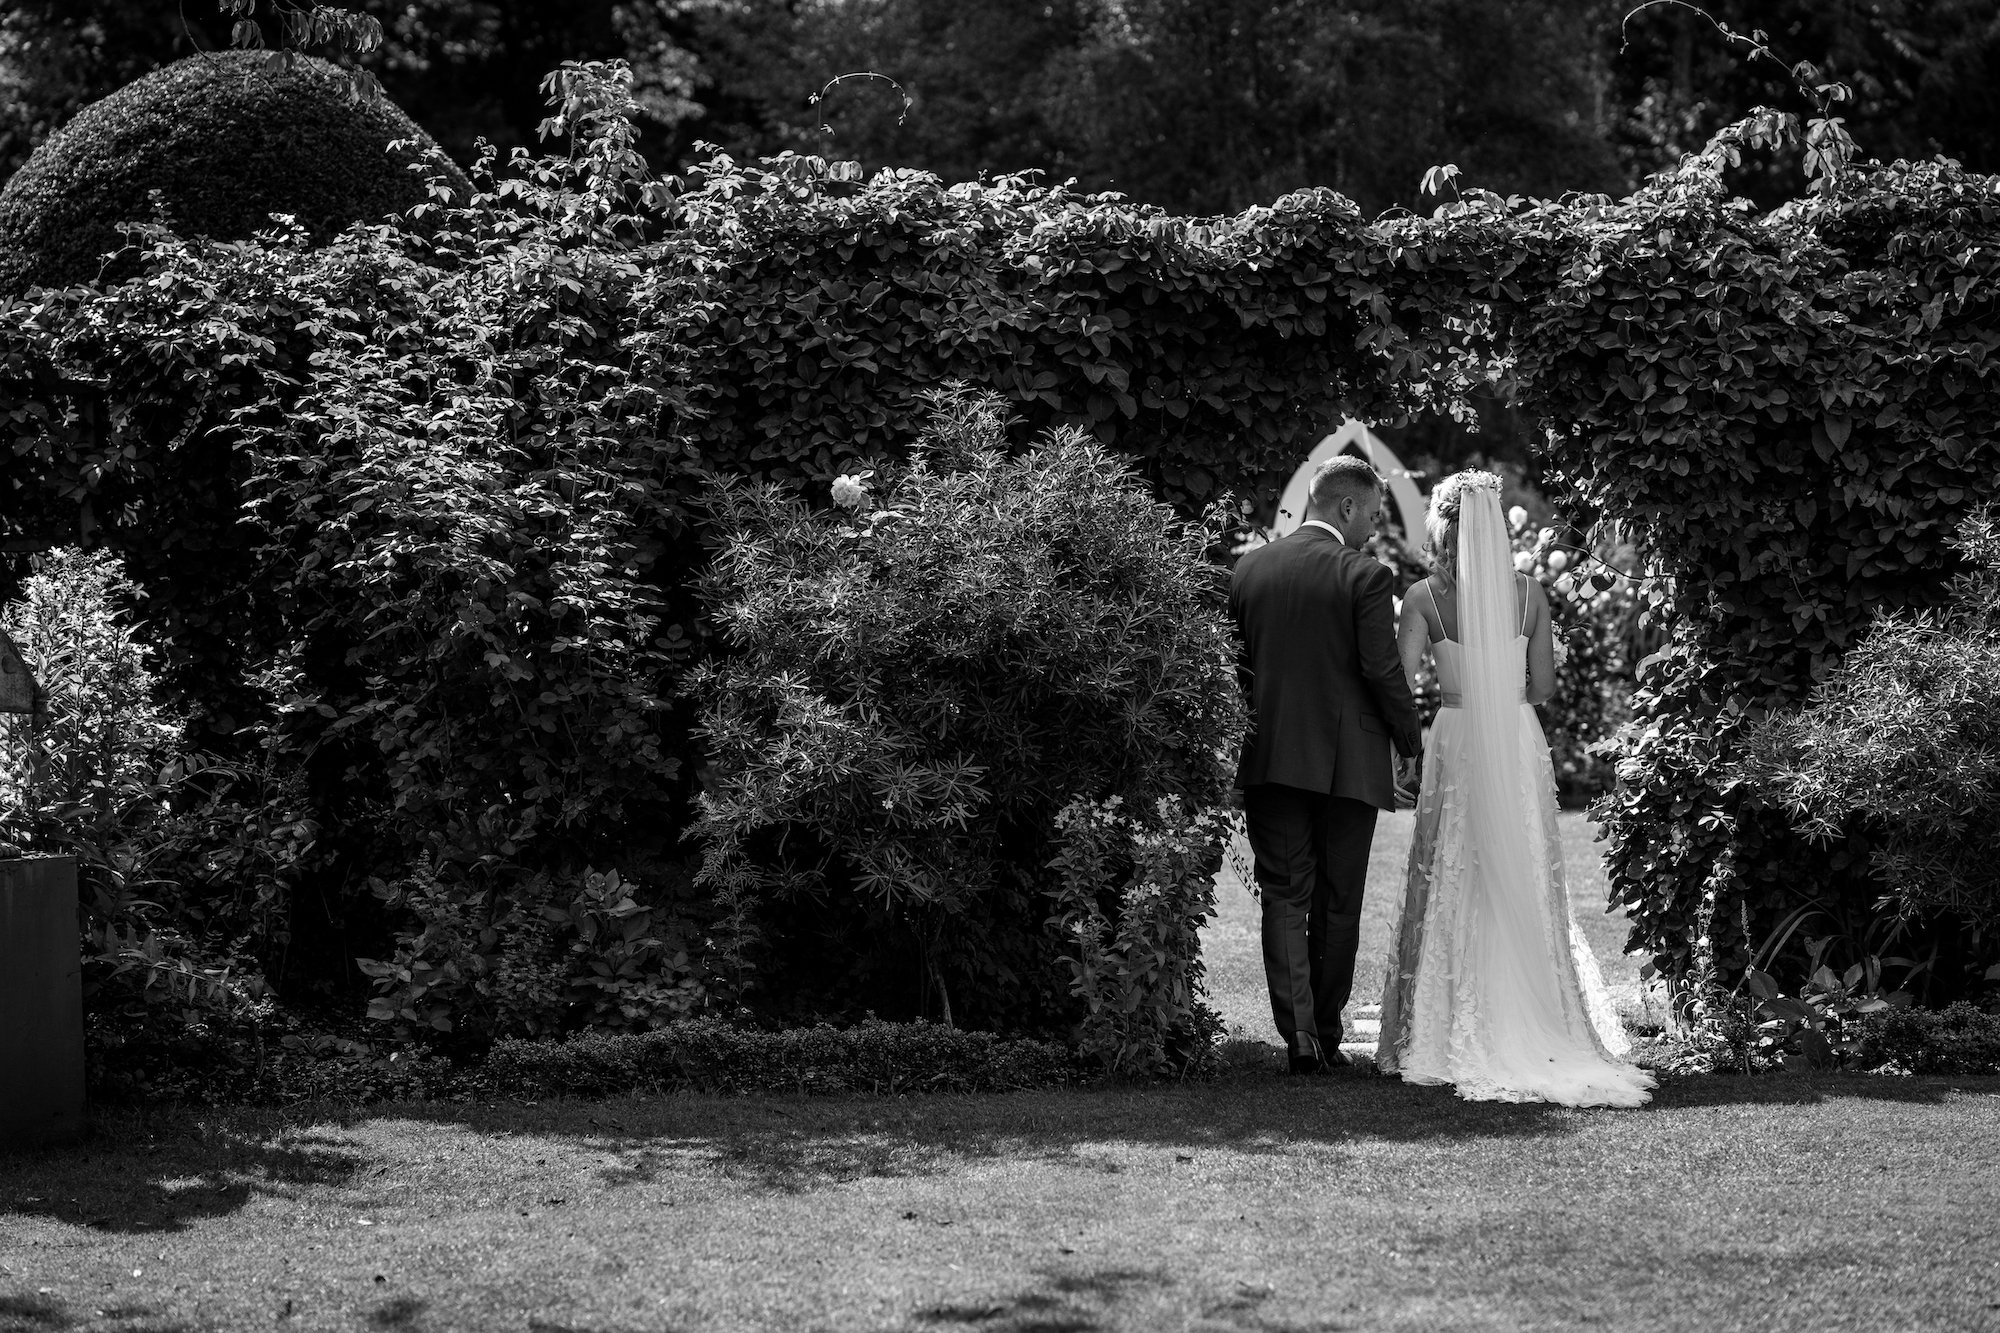 Beautiful bride Emily wore the Finsbury wedding dress and Beale overskirt by Halfpenny London on her wedding day